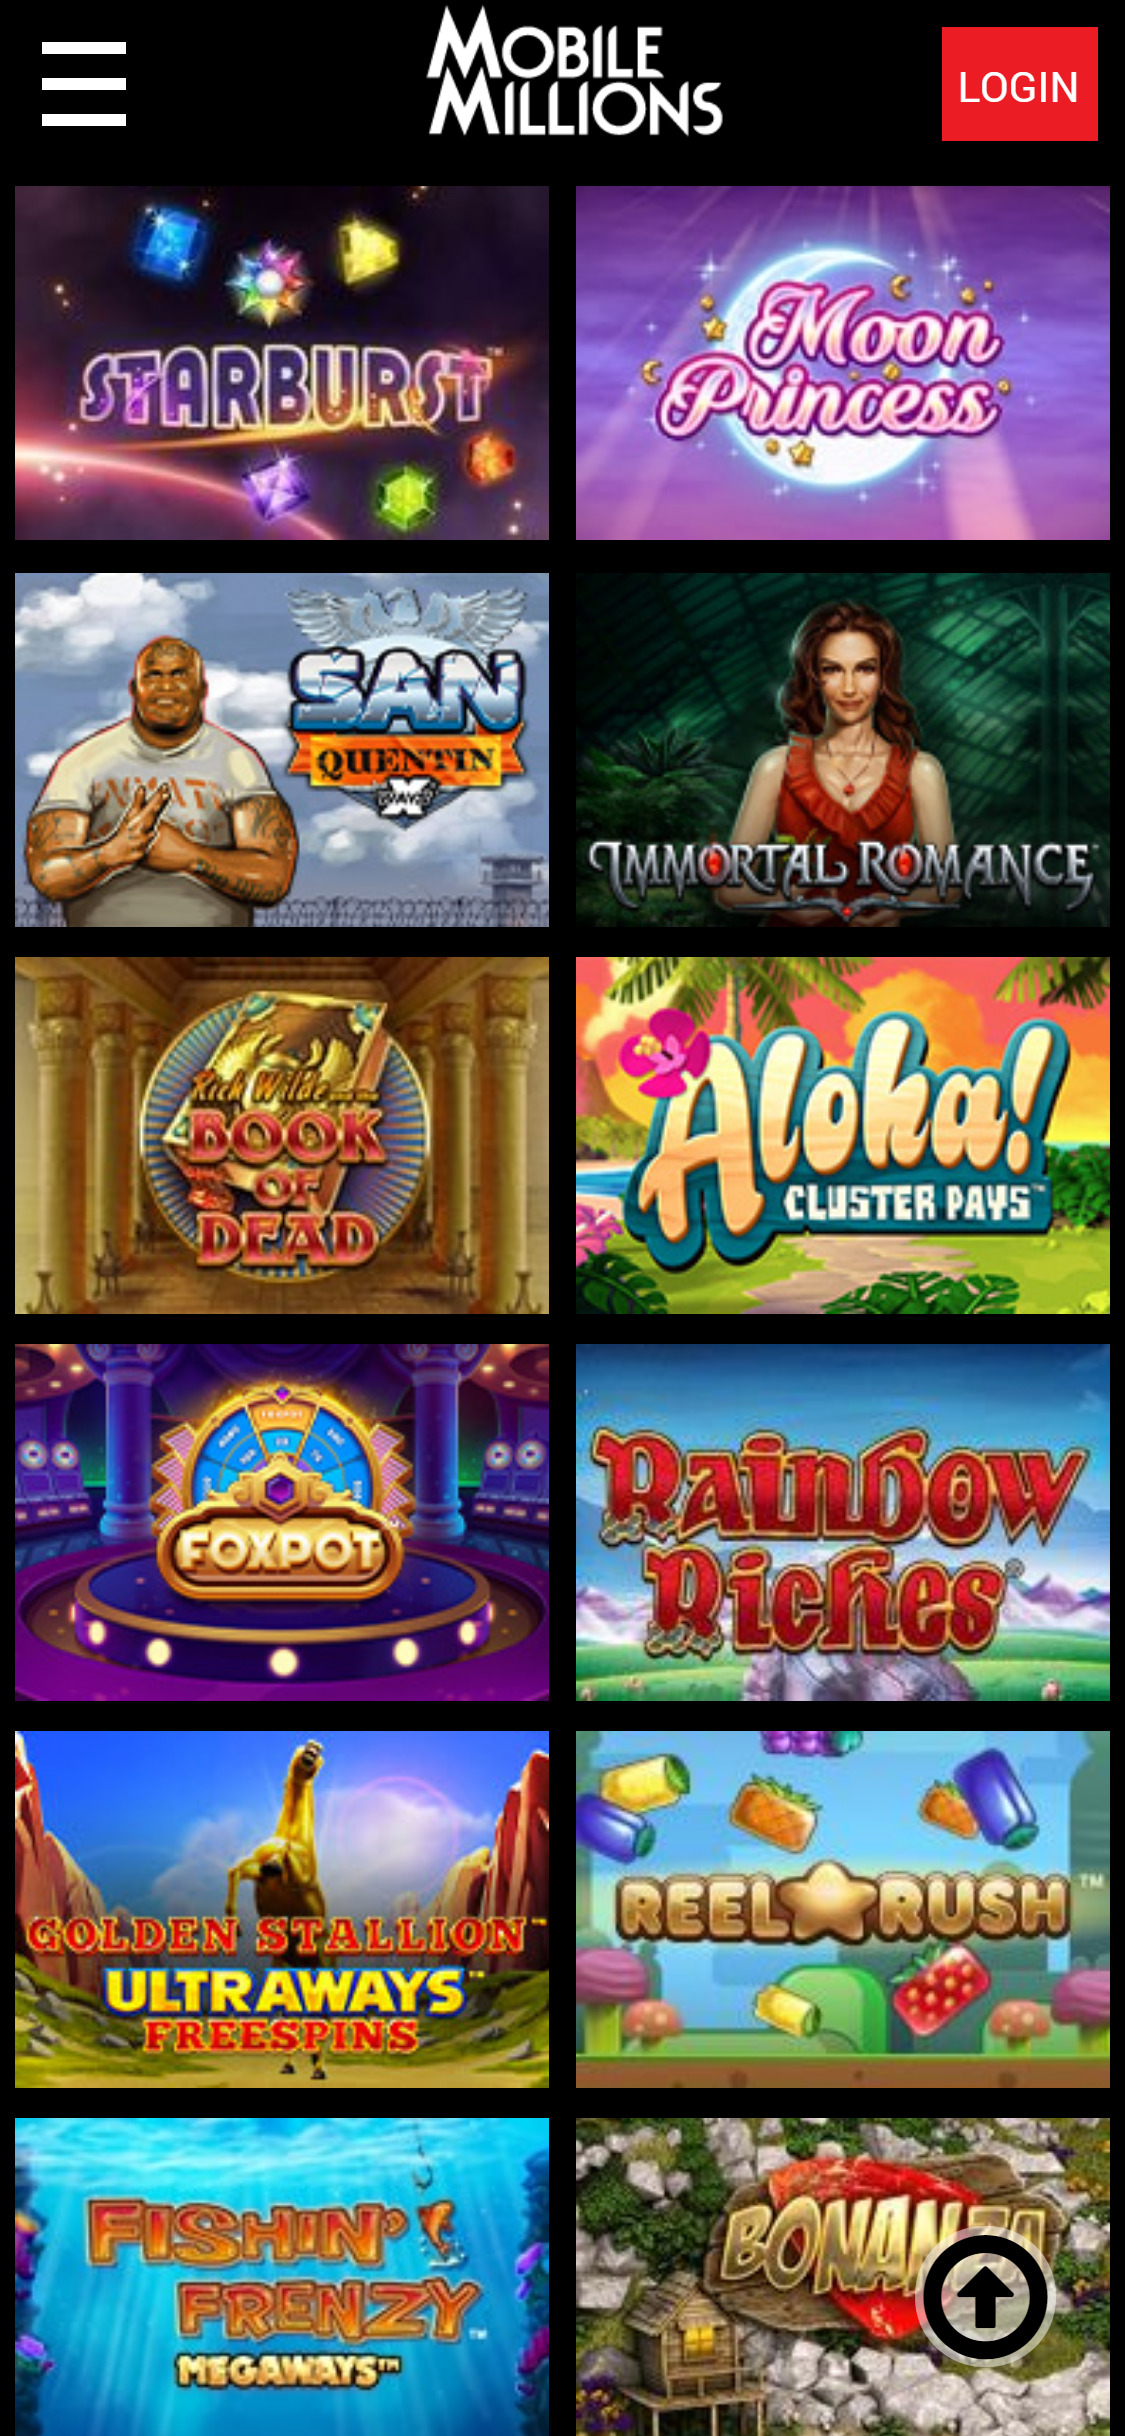 MobileMillions Casino Mobile Games Review